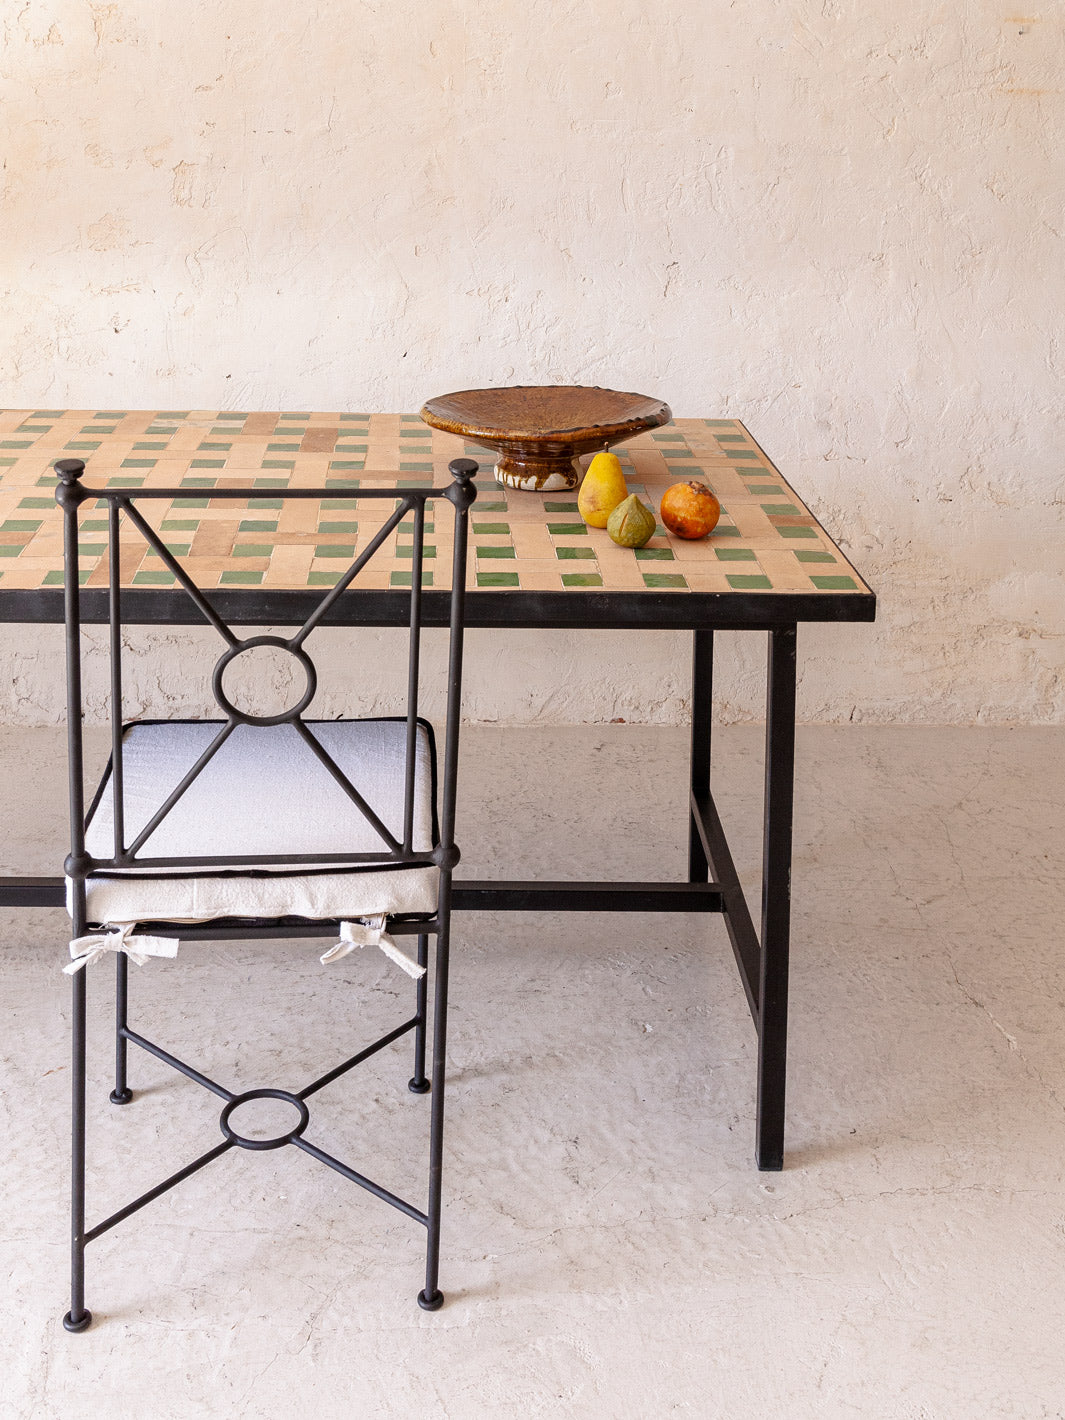 Zellige terracotta and green dining table 200x90cm